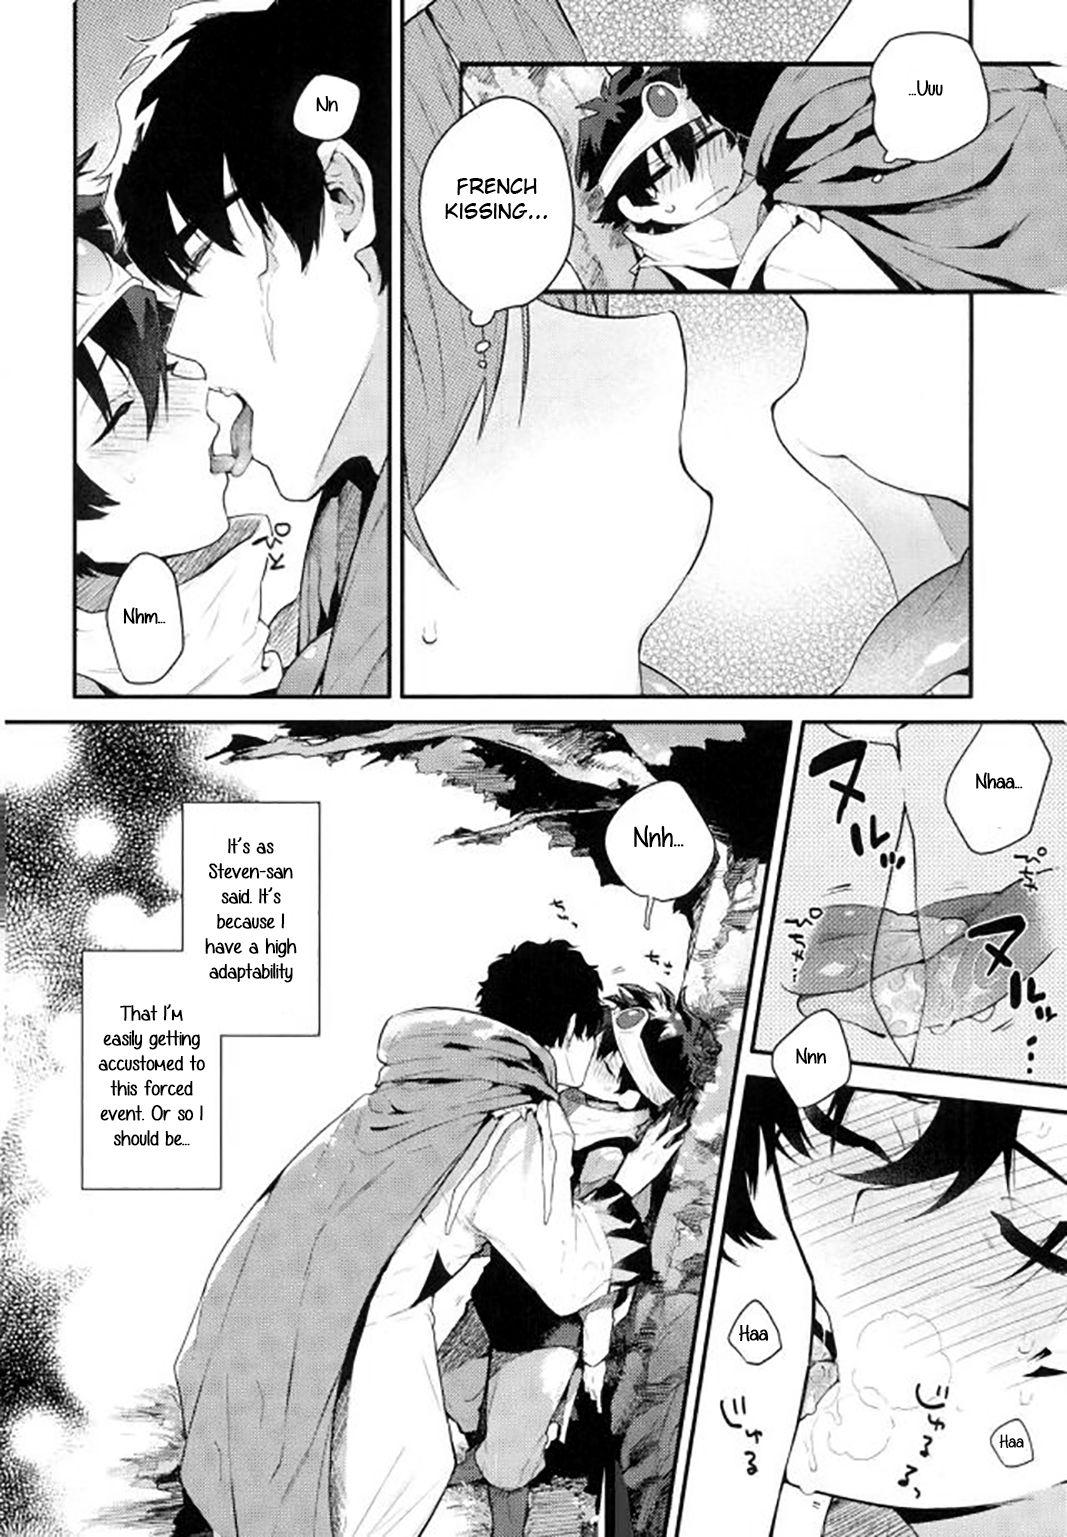 Fit After Being Sent to Another World I'm Forced to a Love Event With My Boss!? - Kekkai sensen Ejaculation - Page 7